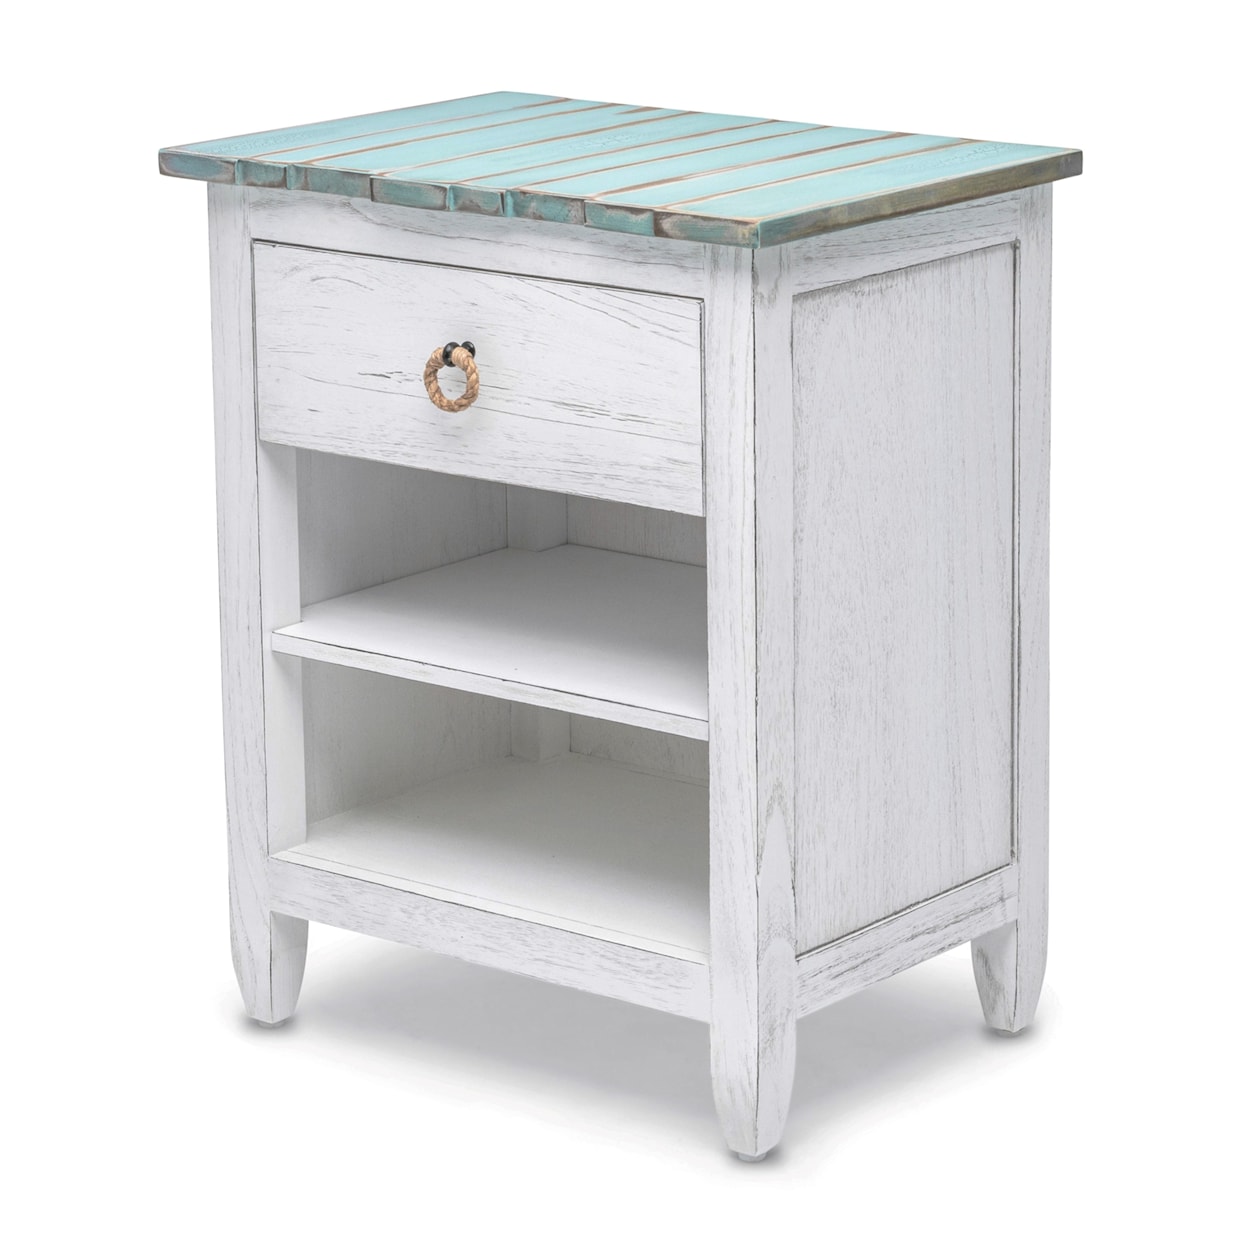 Sea Winds Trading Company Picket Fence Bedroom Collection Nightstand